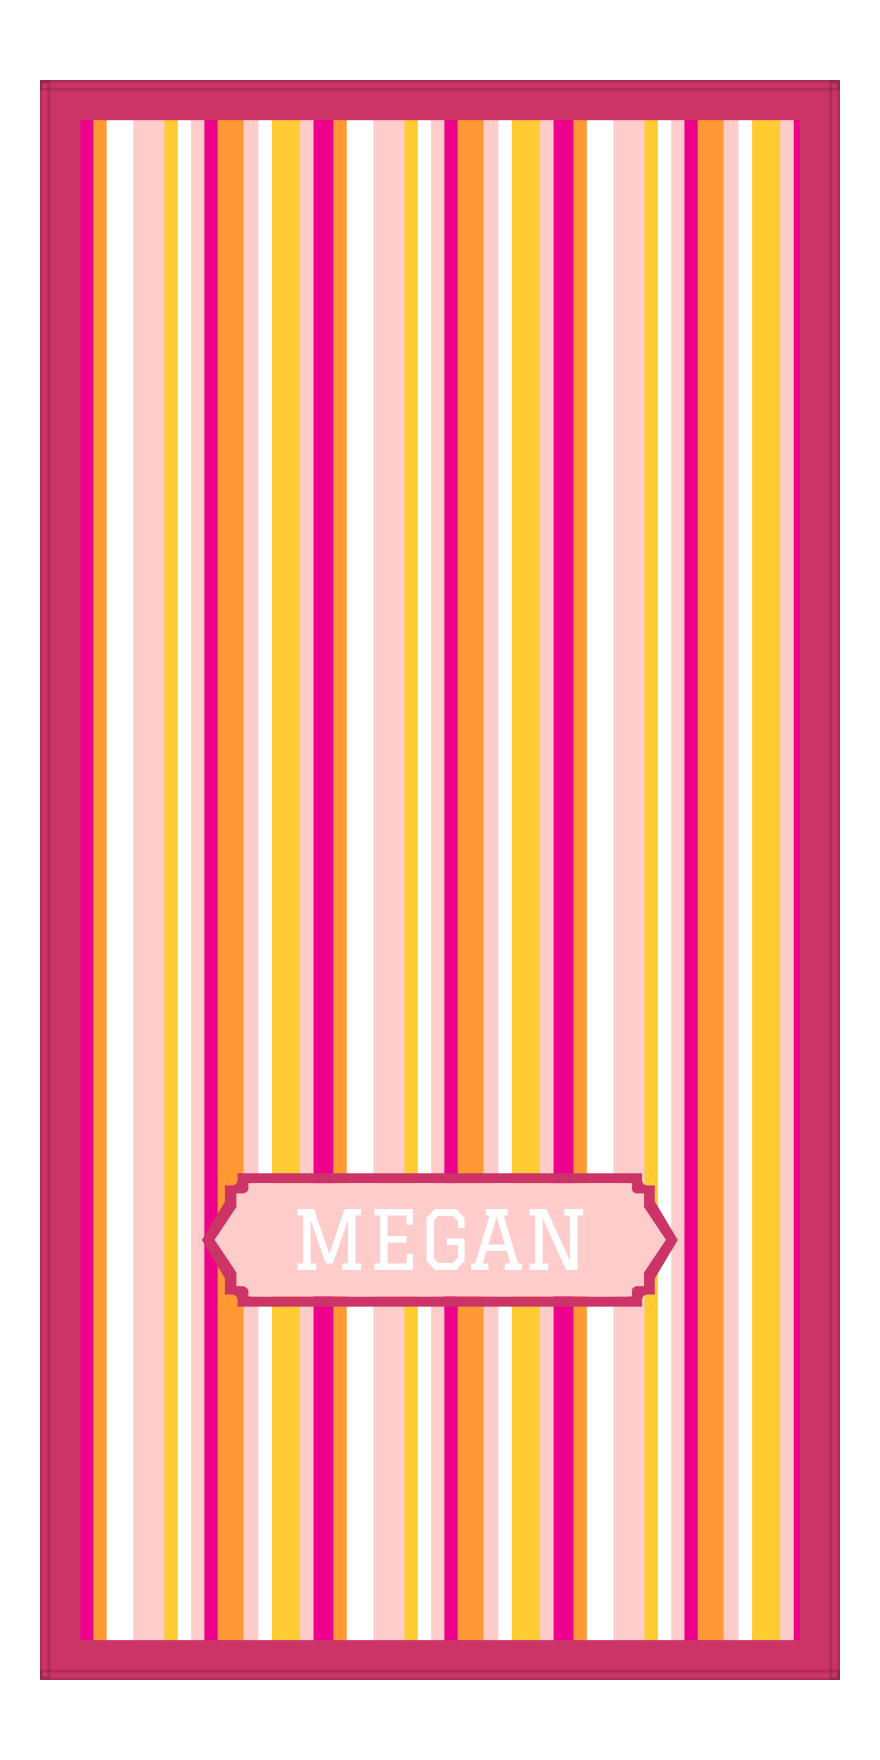 Personalized 5 Color Stripes 3 Repeat Beach Towel - Vertical - Pink and Orange - Oblong Off Center Frame - Front View